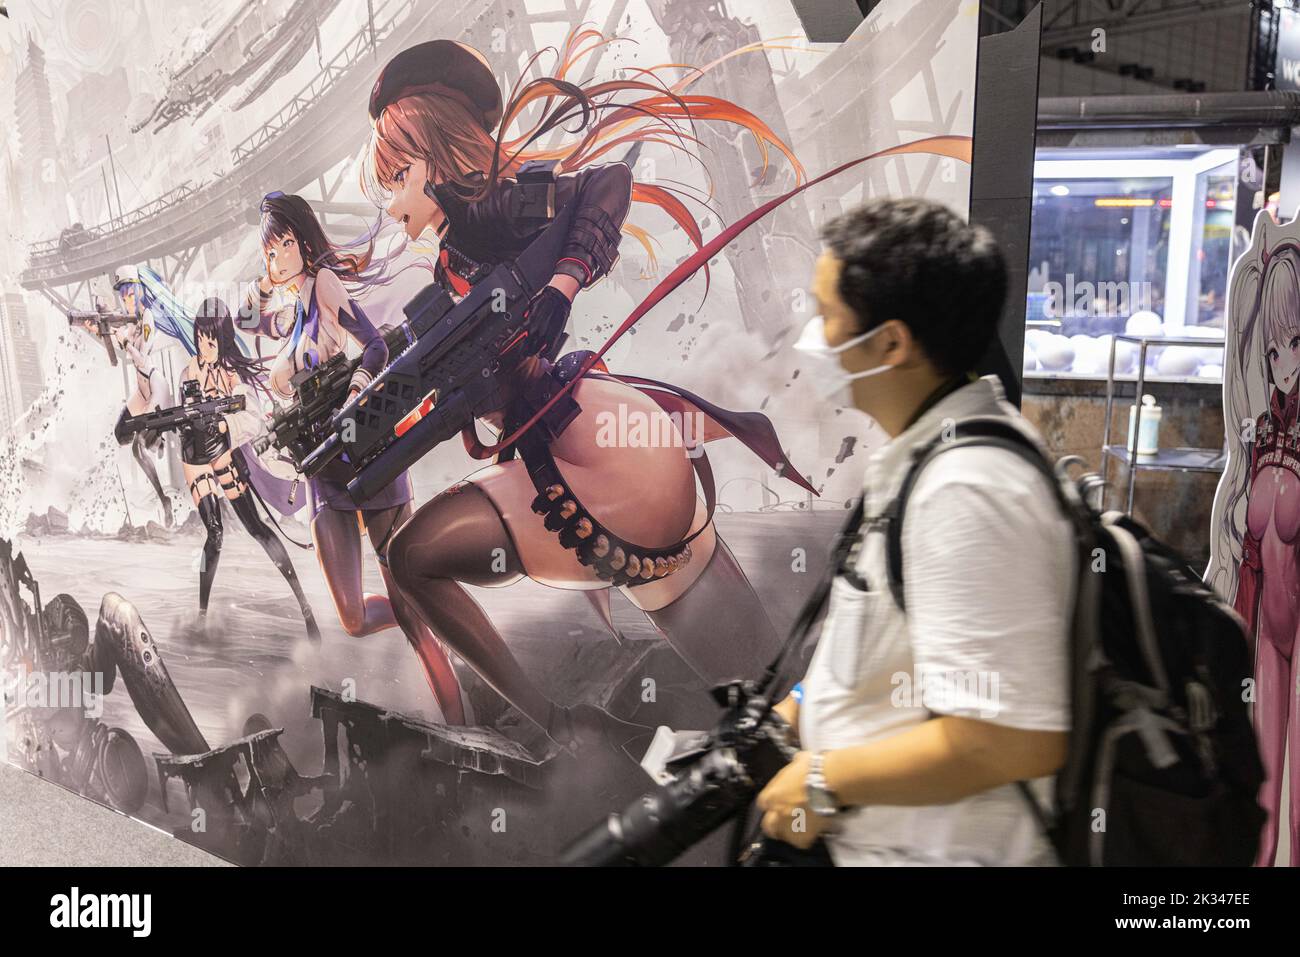 Chiba Japan 17th Sep 2022 Artwork Of Over Sexualized Video Game